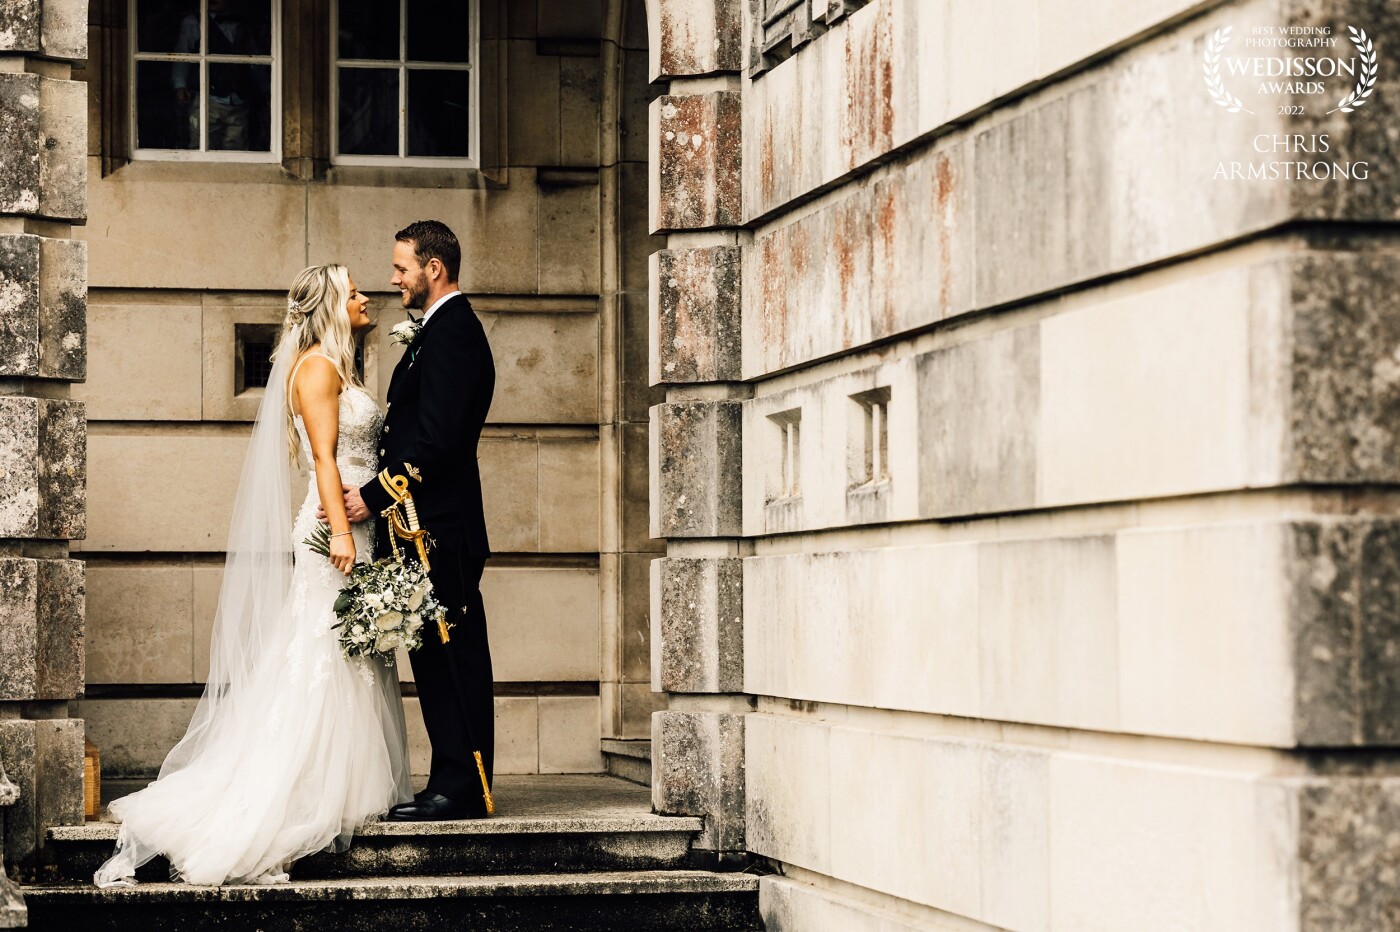 Eliza and Will shortly before their Wedding Breakfast at the beautiful and historic Britannia Royal Naval College, Dartmouth. Both looked amazing!